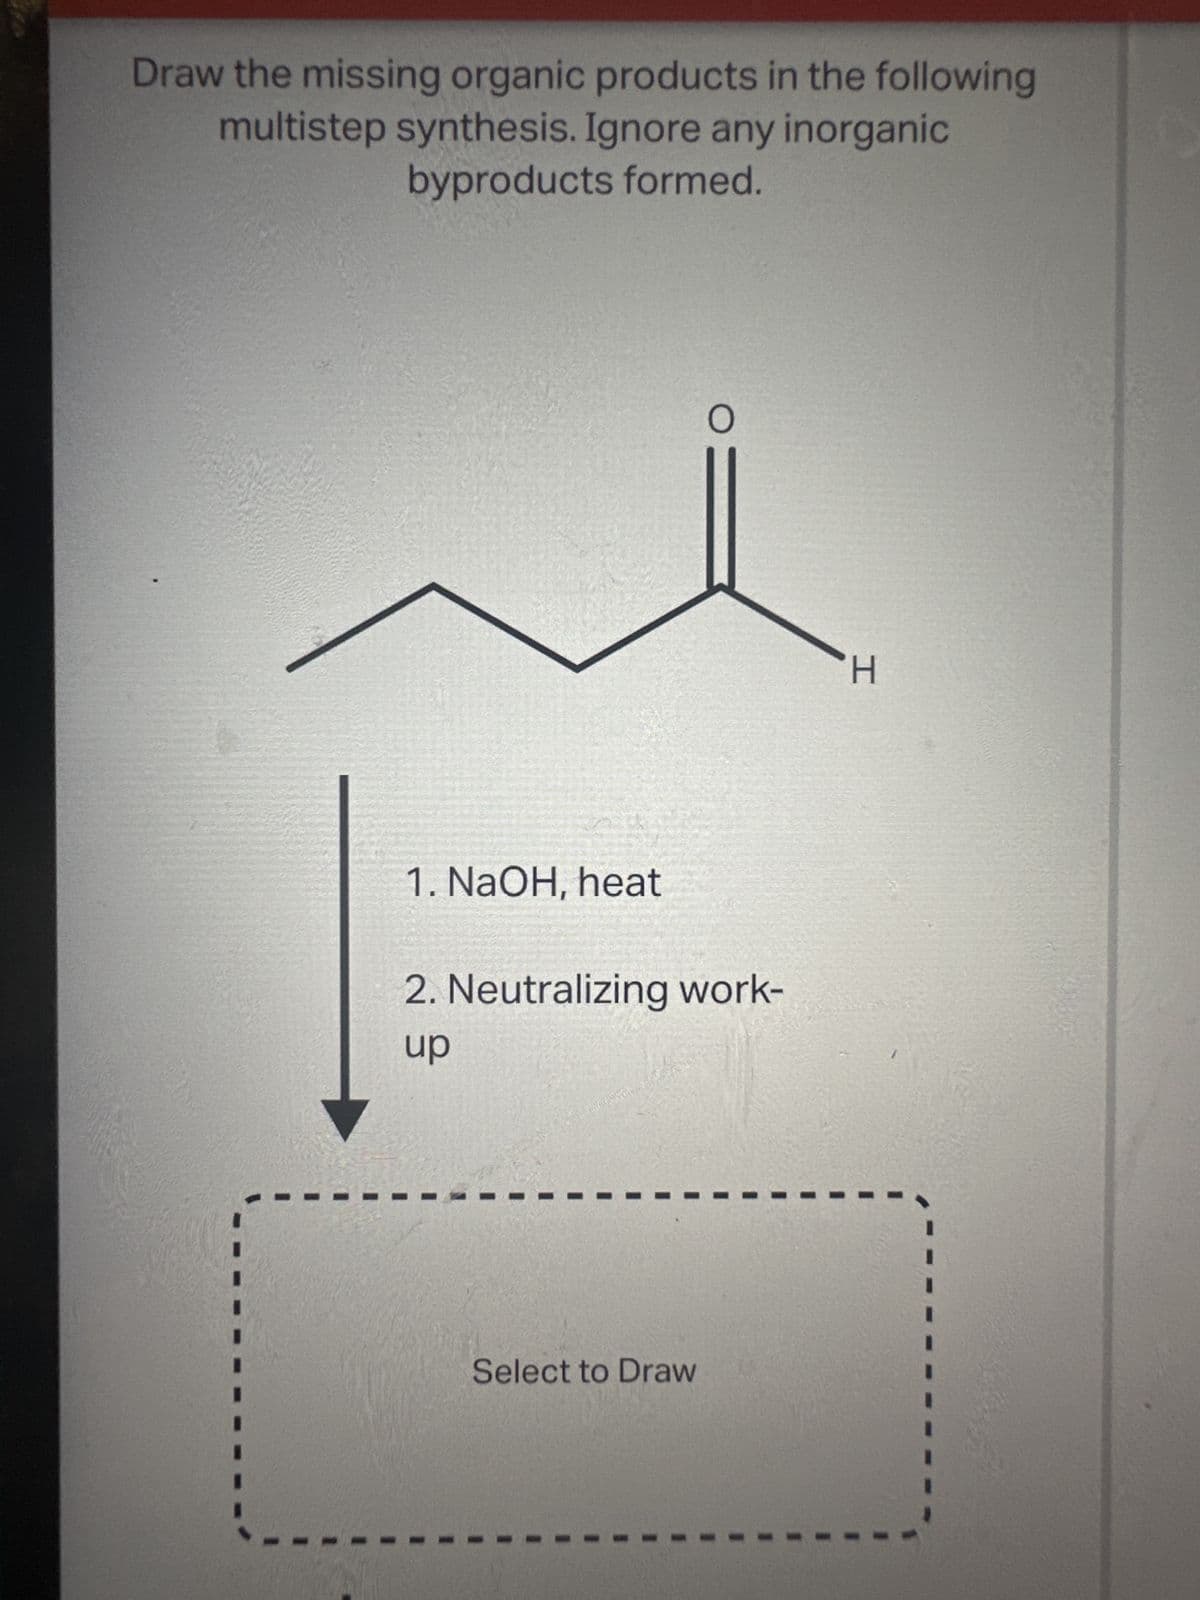 Draw the missing organic products in the following
multistep synthesis. Ignore any inorganic
byproducts formed.
1. NaOH, heat
O
2. Neutralizing work-
up
Select to Draw
-H